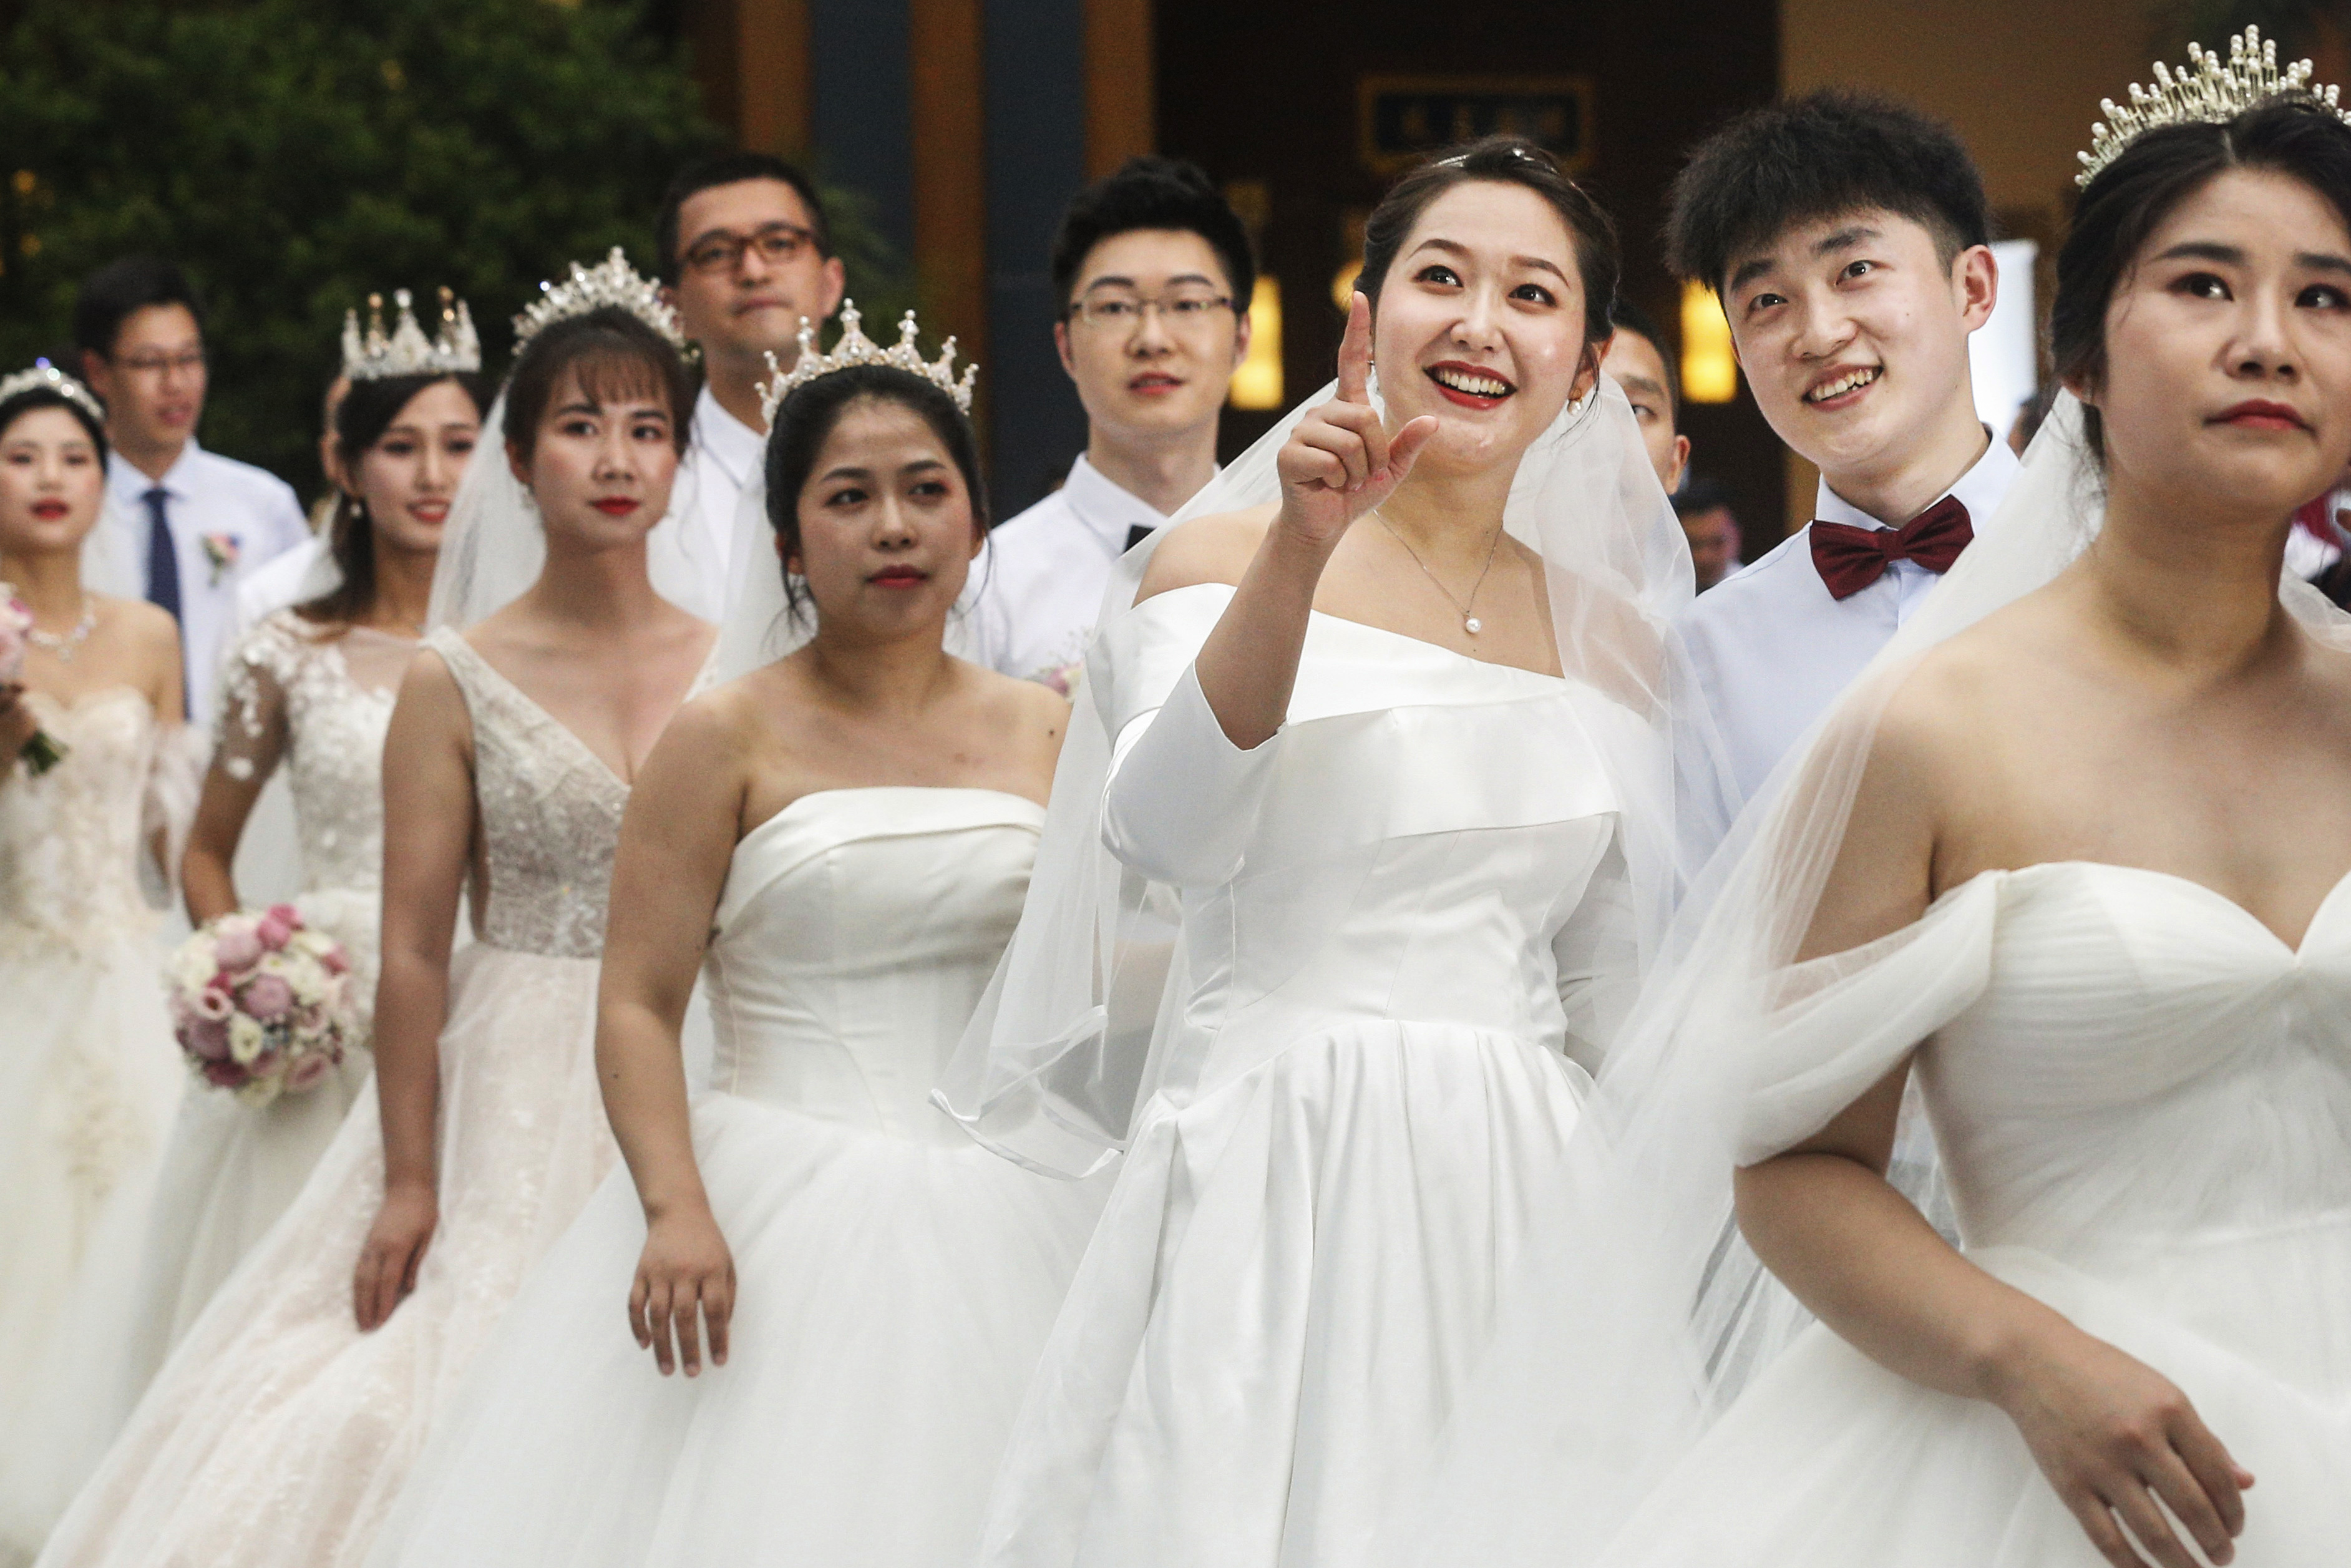 Cui (third from right) and Yao (second from right) join a group wedding held in Bo